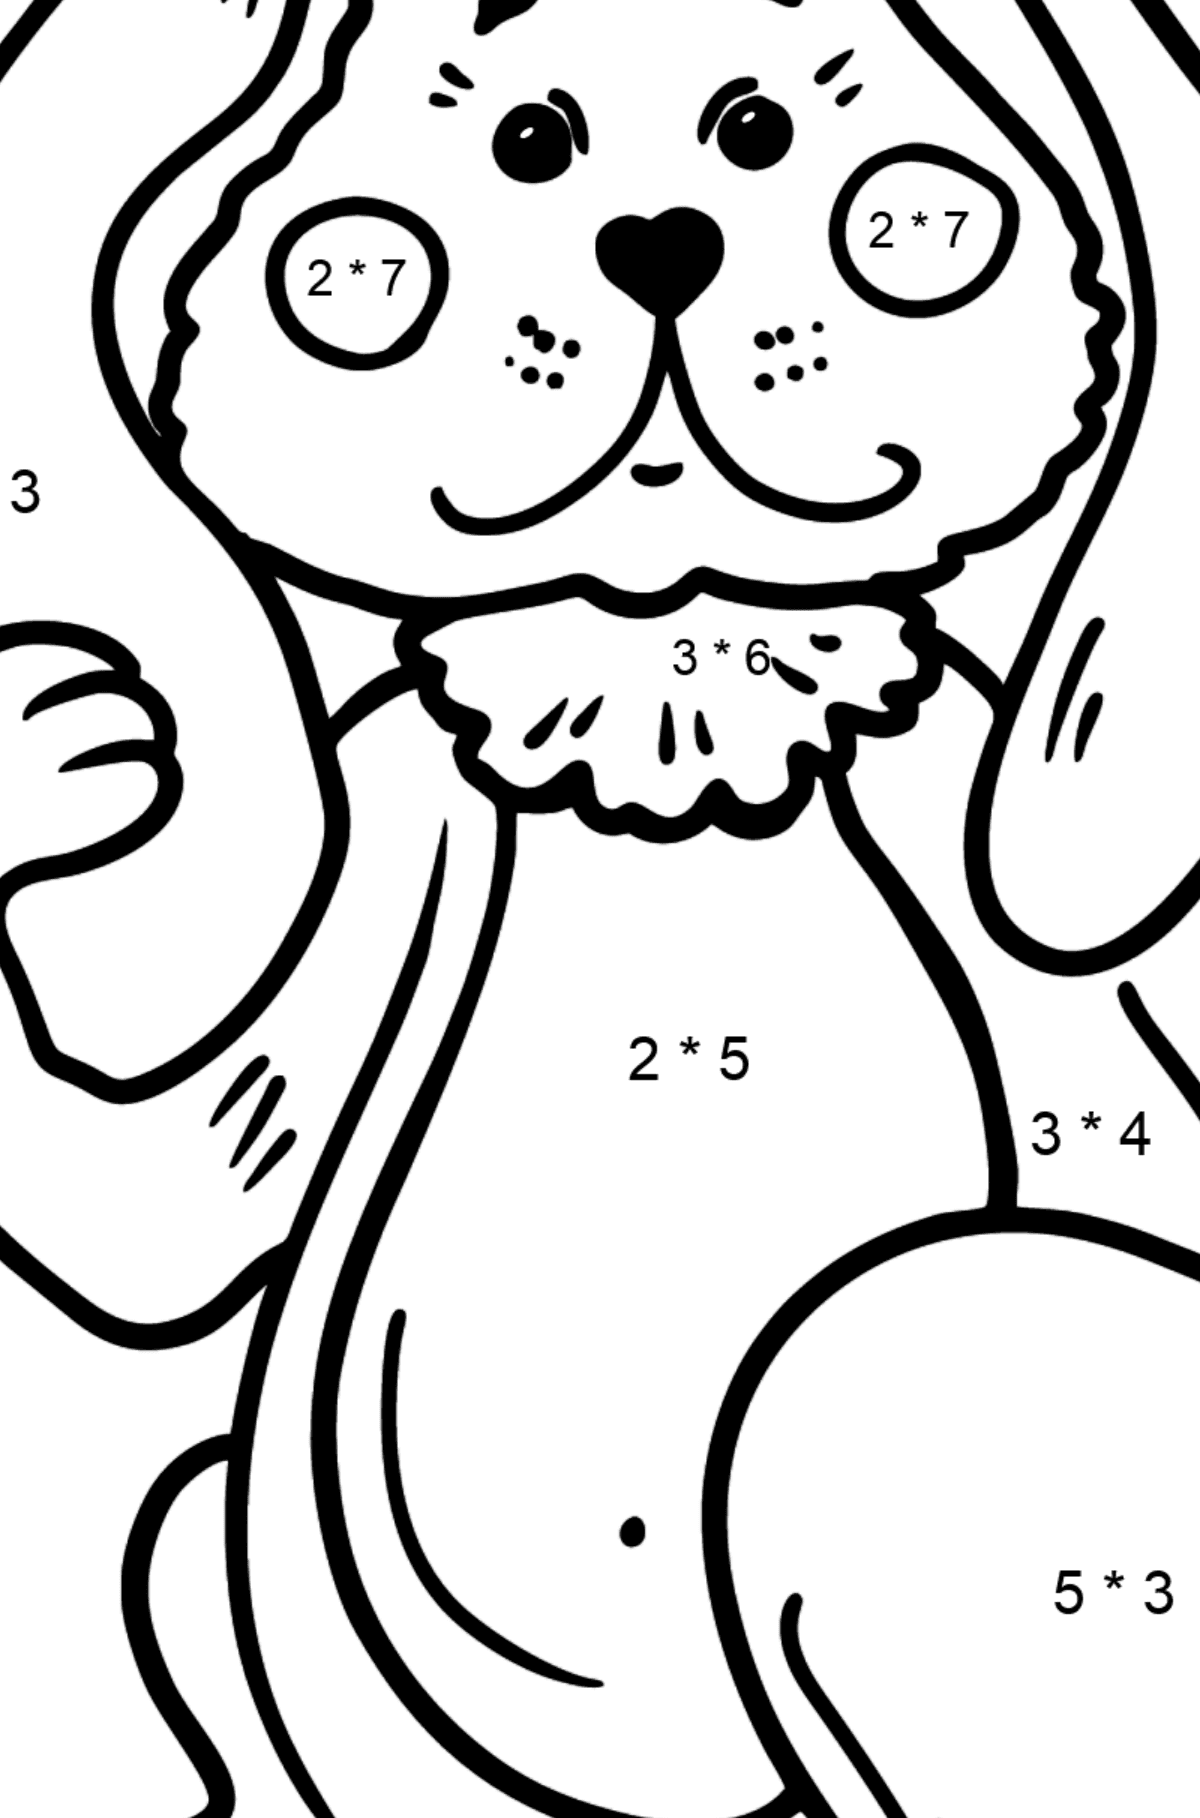 Sad Bunny coloring page - Math Coloring - Multiplication for Kids